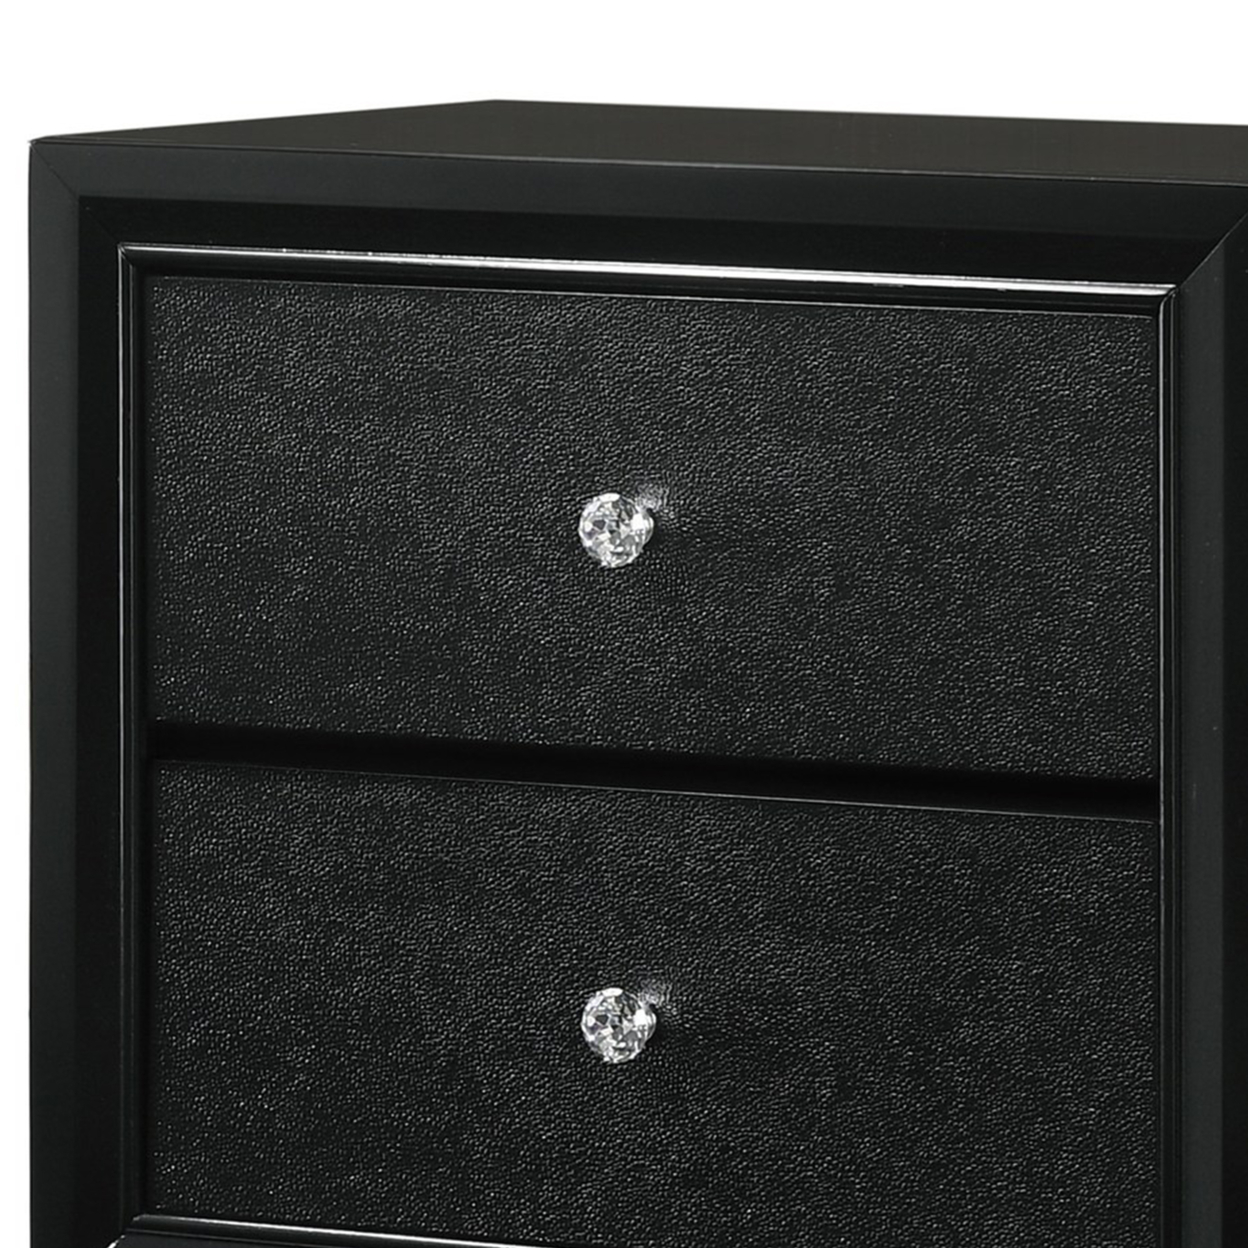 2 Drawer Wooden Nightstand With Textured Details And Crystal Pulls, Black- Saltoro Sherpi